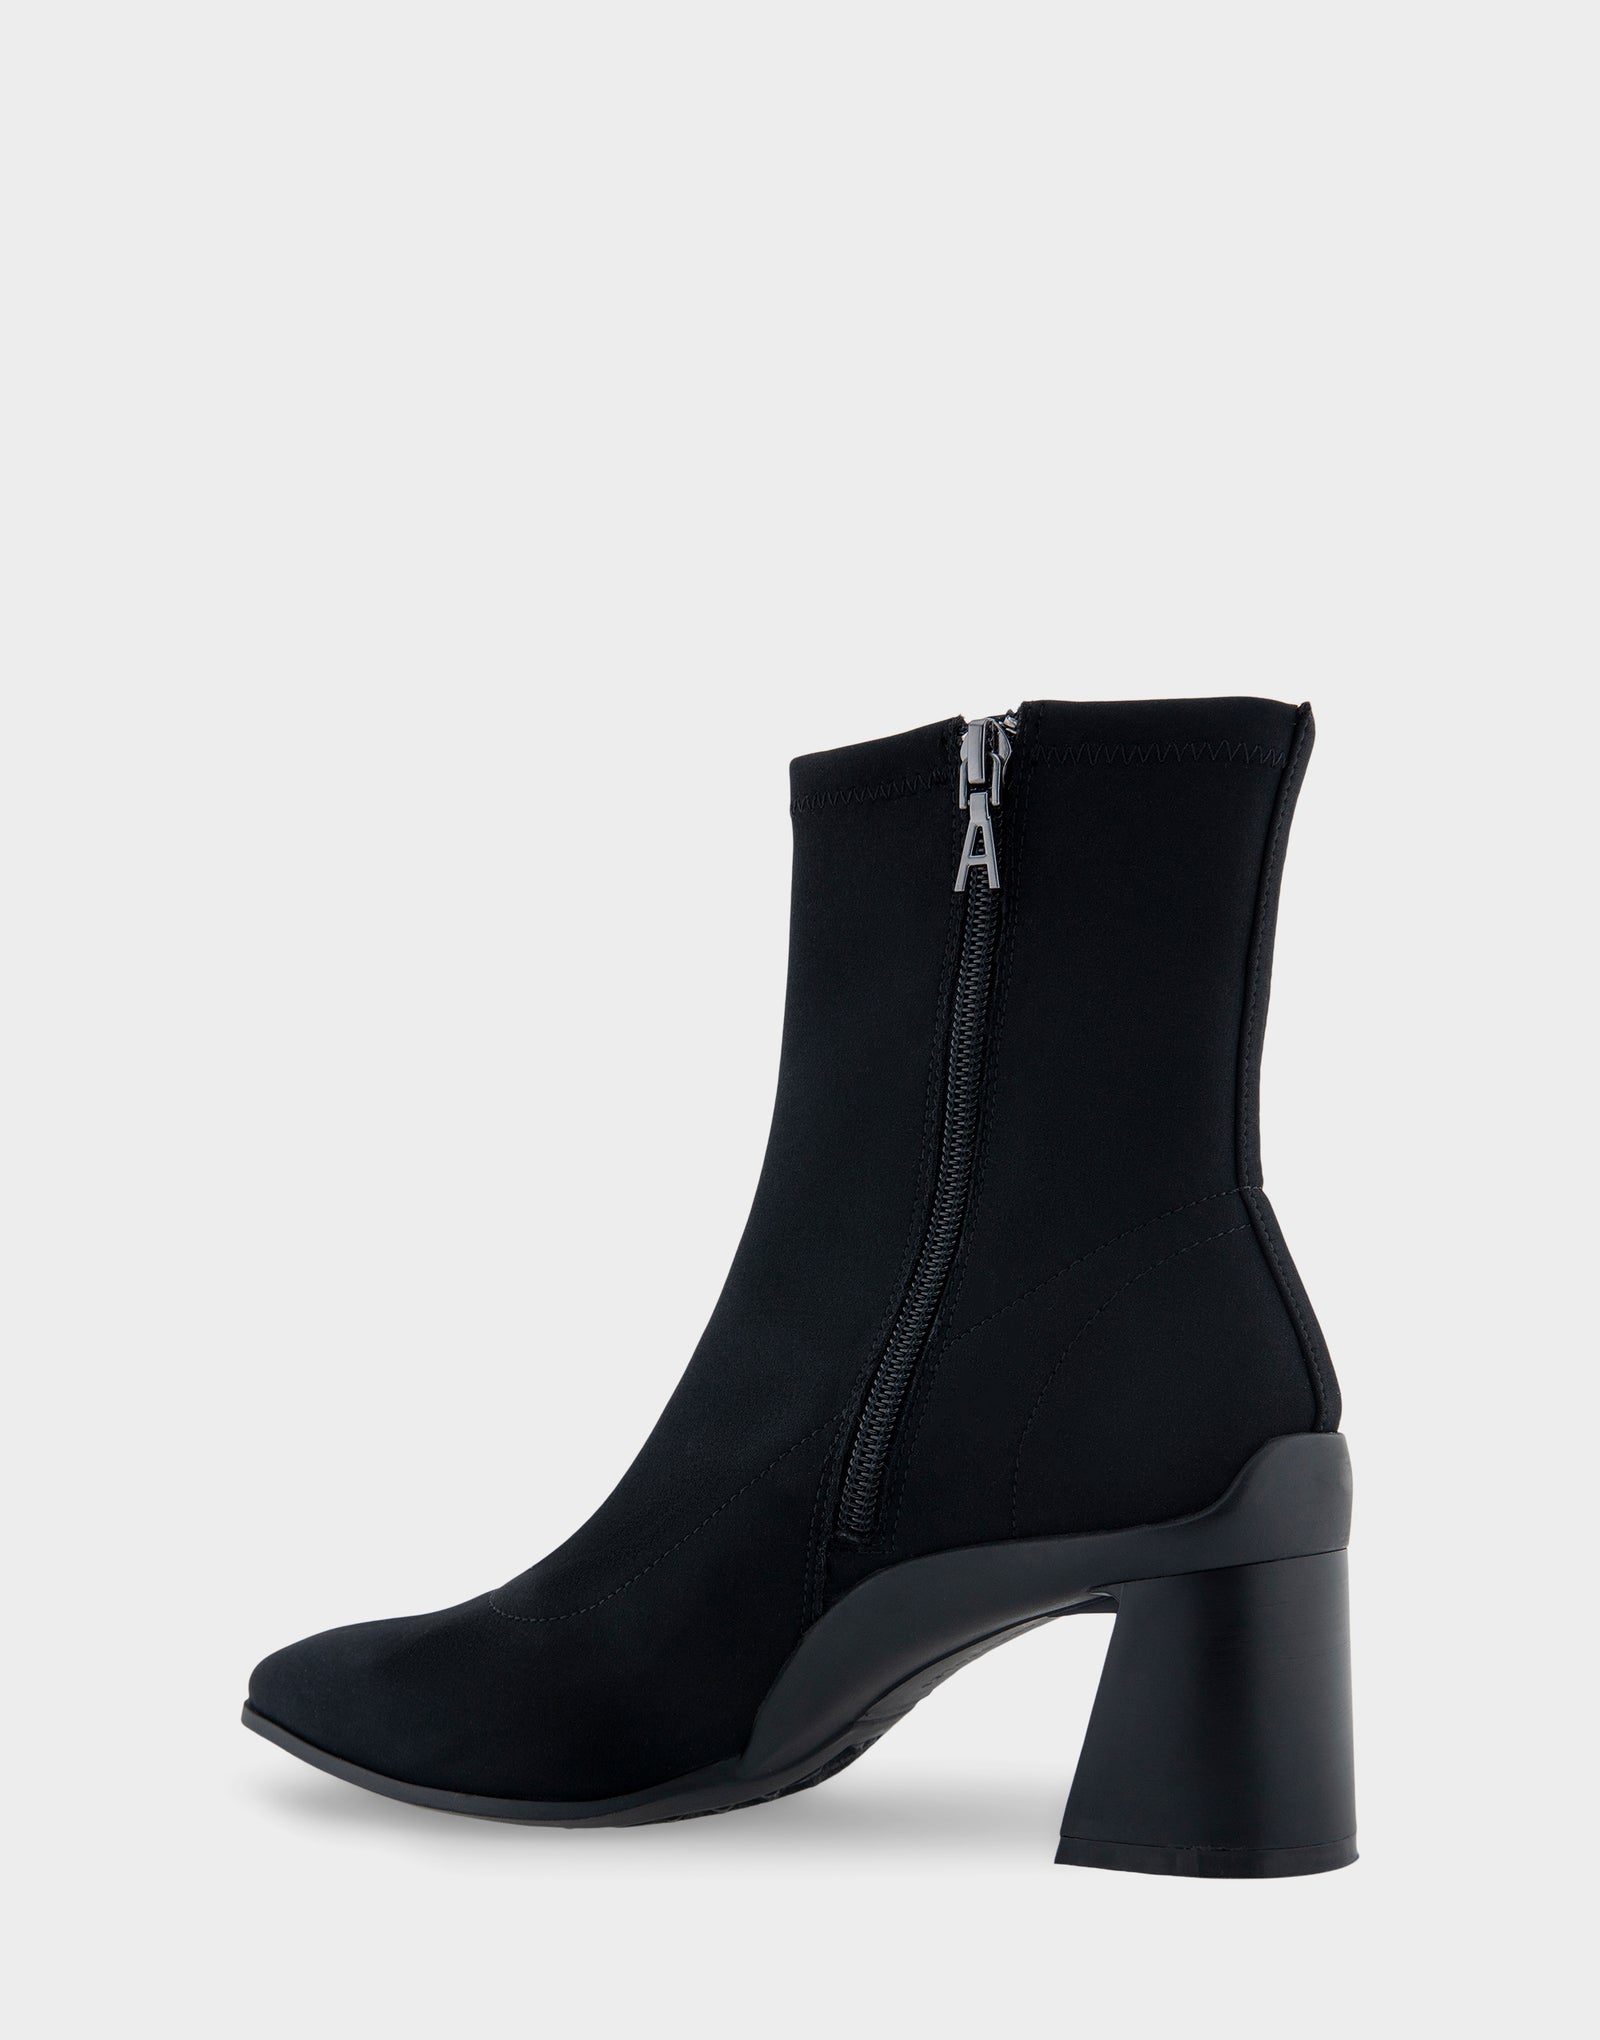 Women's Heeled Ankle Boot in Black